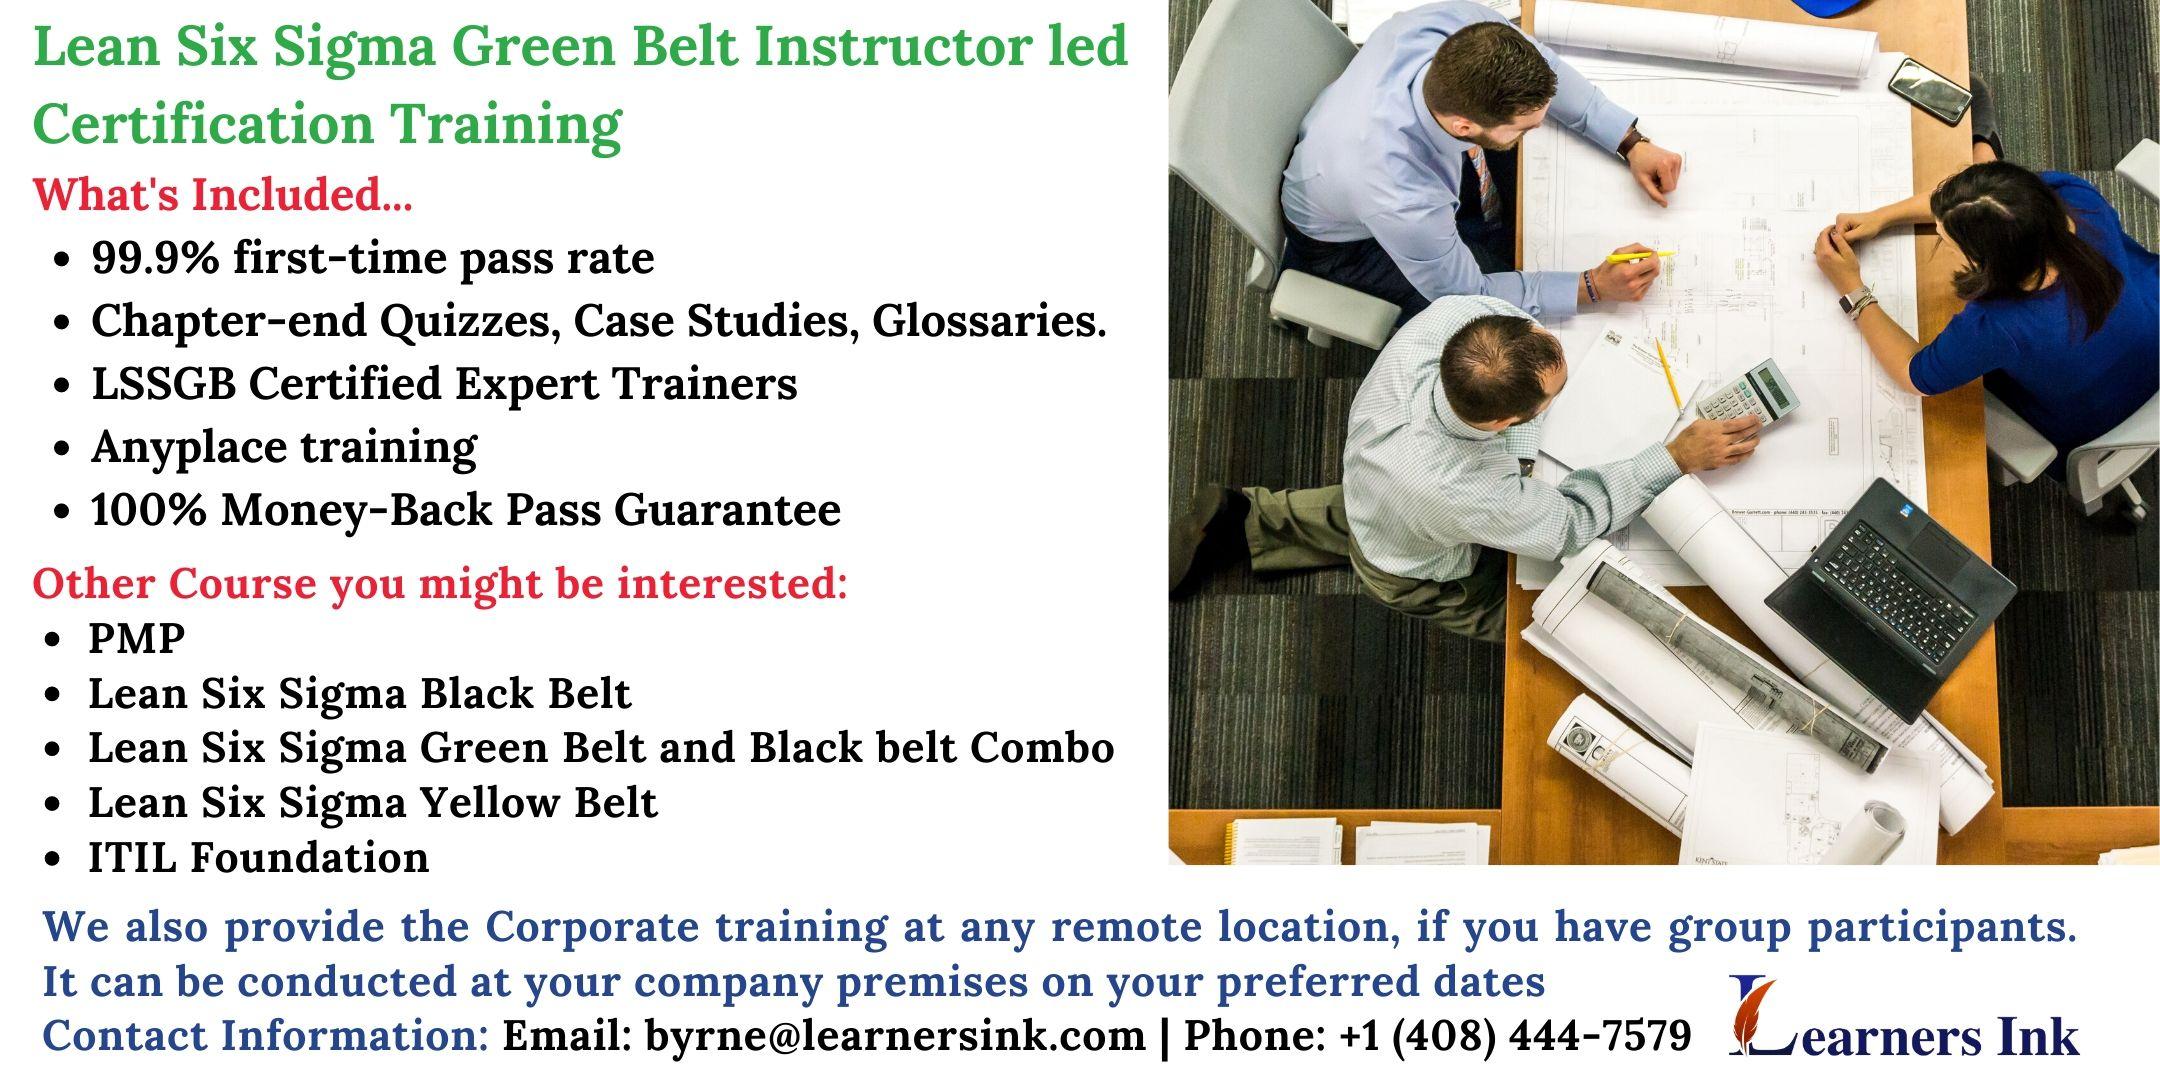 Lean Six Sigma Green Belt Certification Training Course (LSSGB) in Clearwater